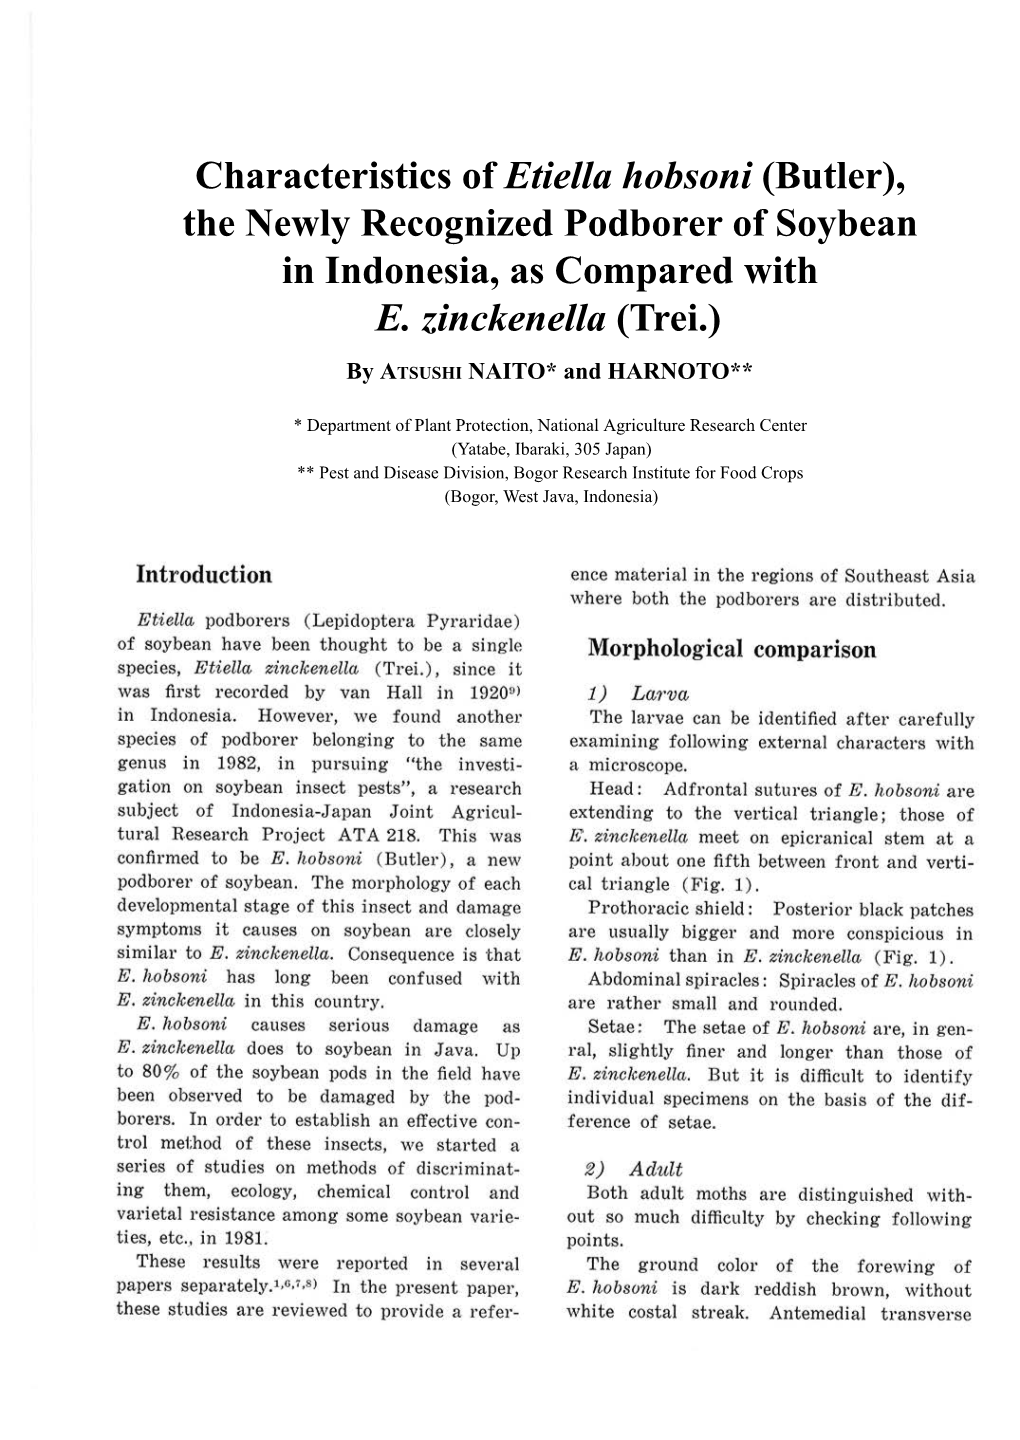 Characteristics of Etiella Hobsoni (Butler), the Newly Recognized Podborer of Soybean in Indonesia, As Compared with E